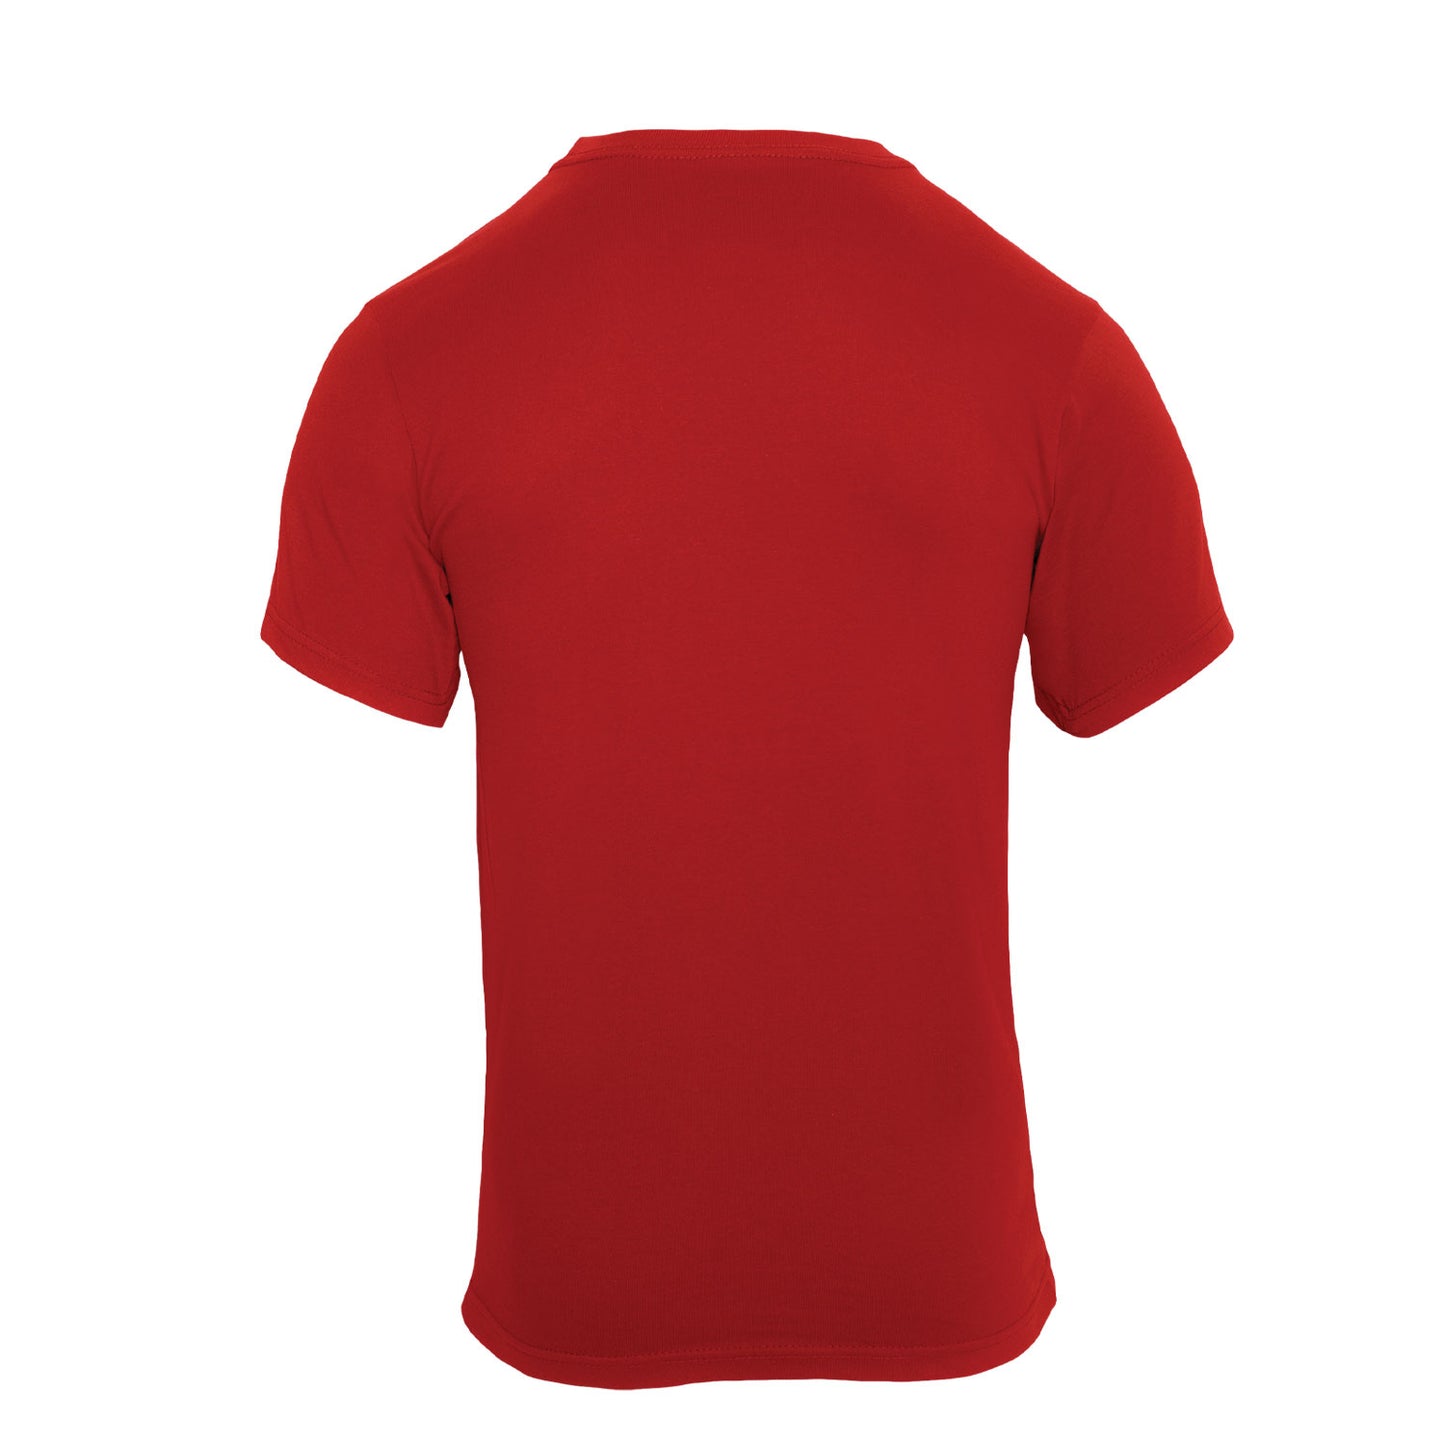 Men's Officially Licensed "Marines" Red T-Shirt